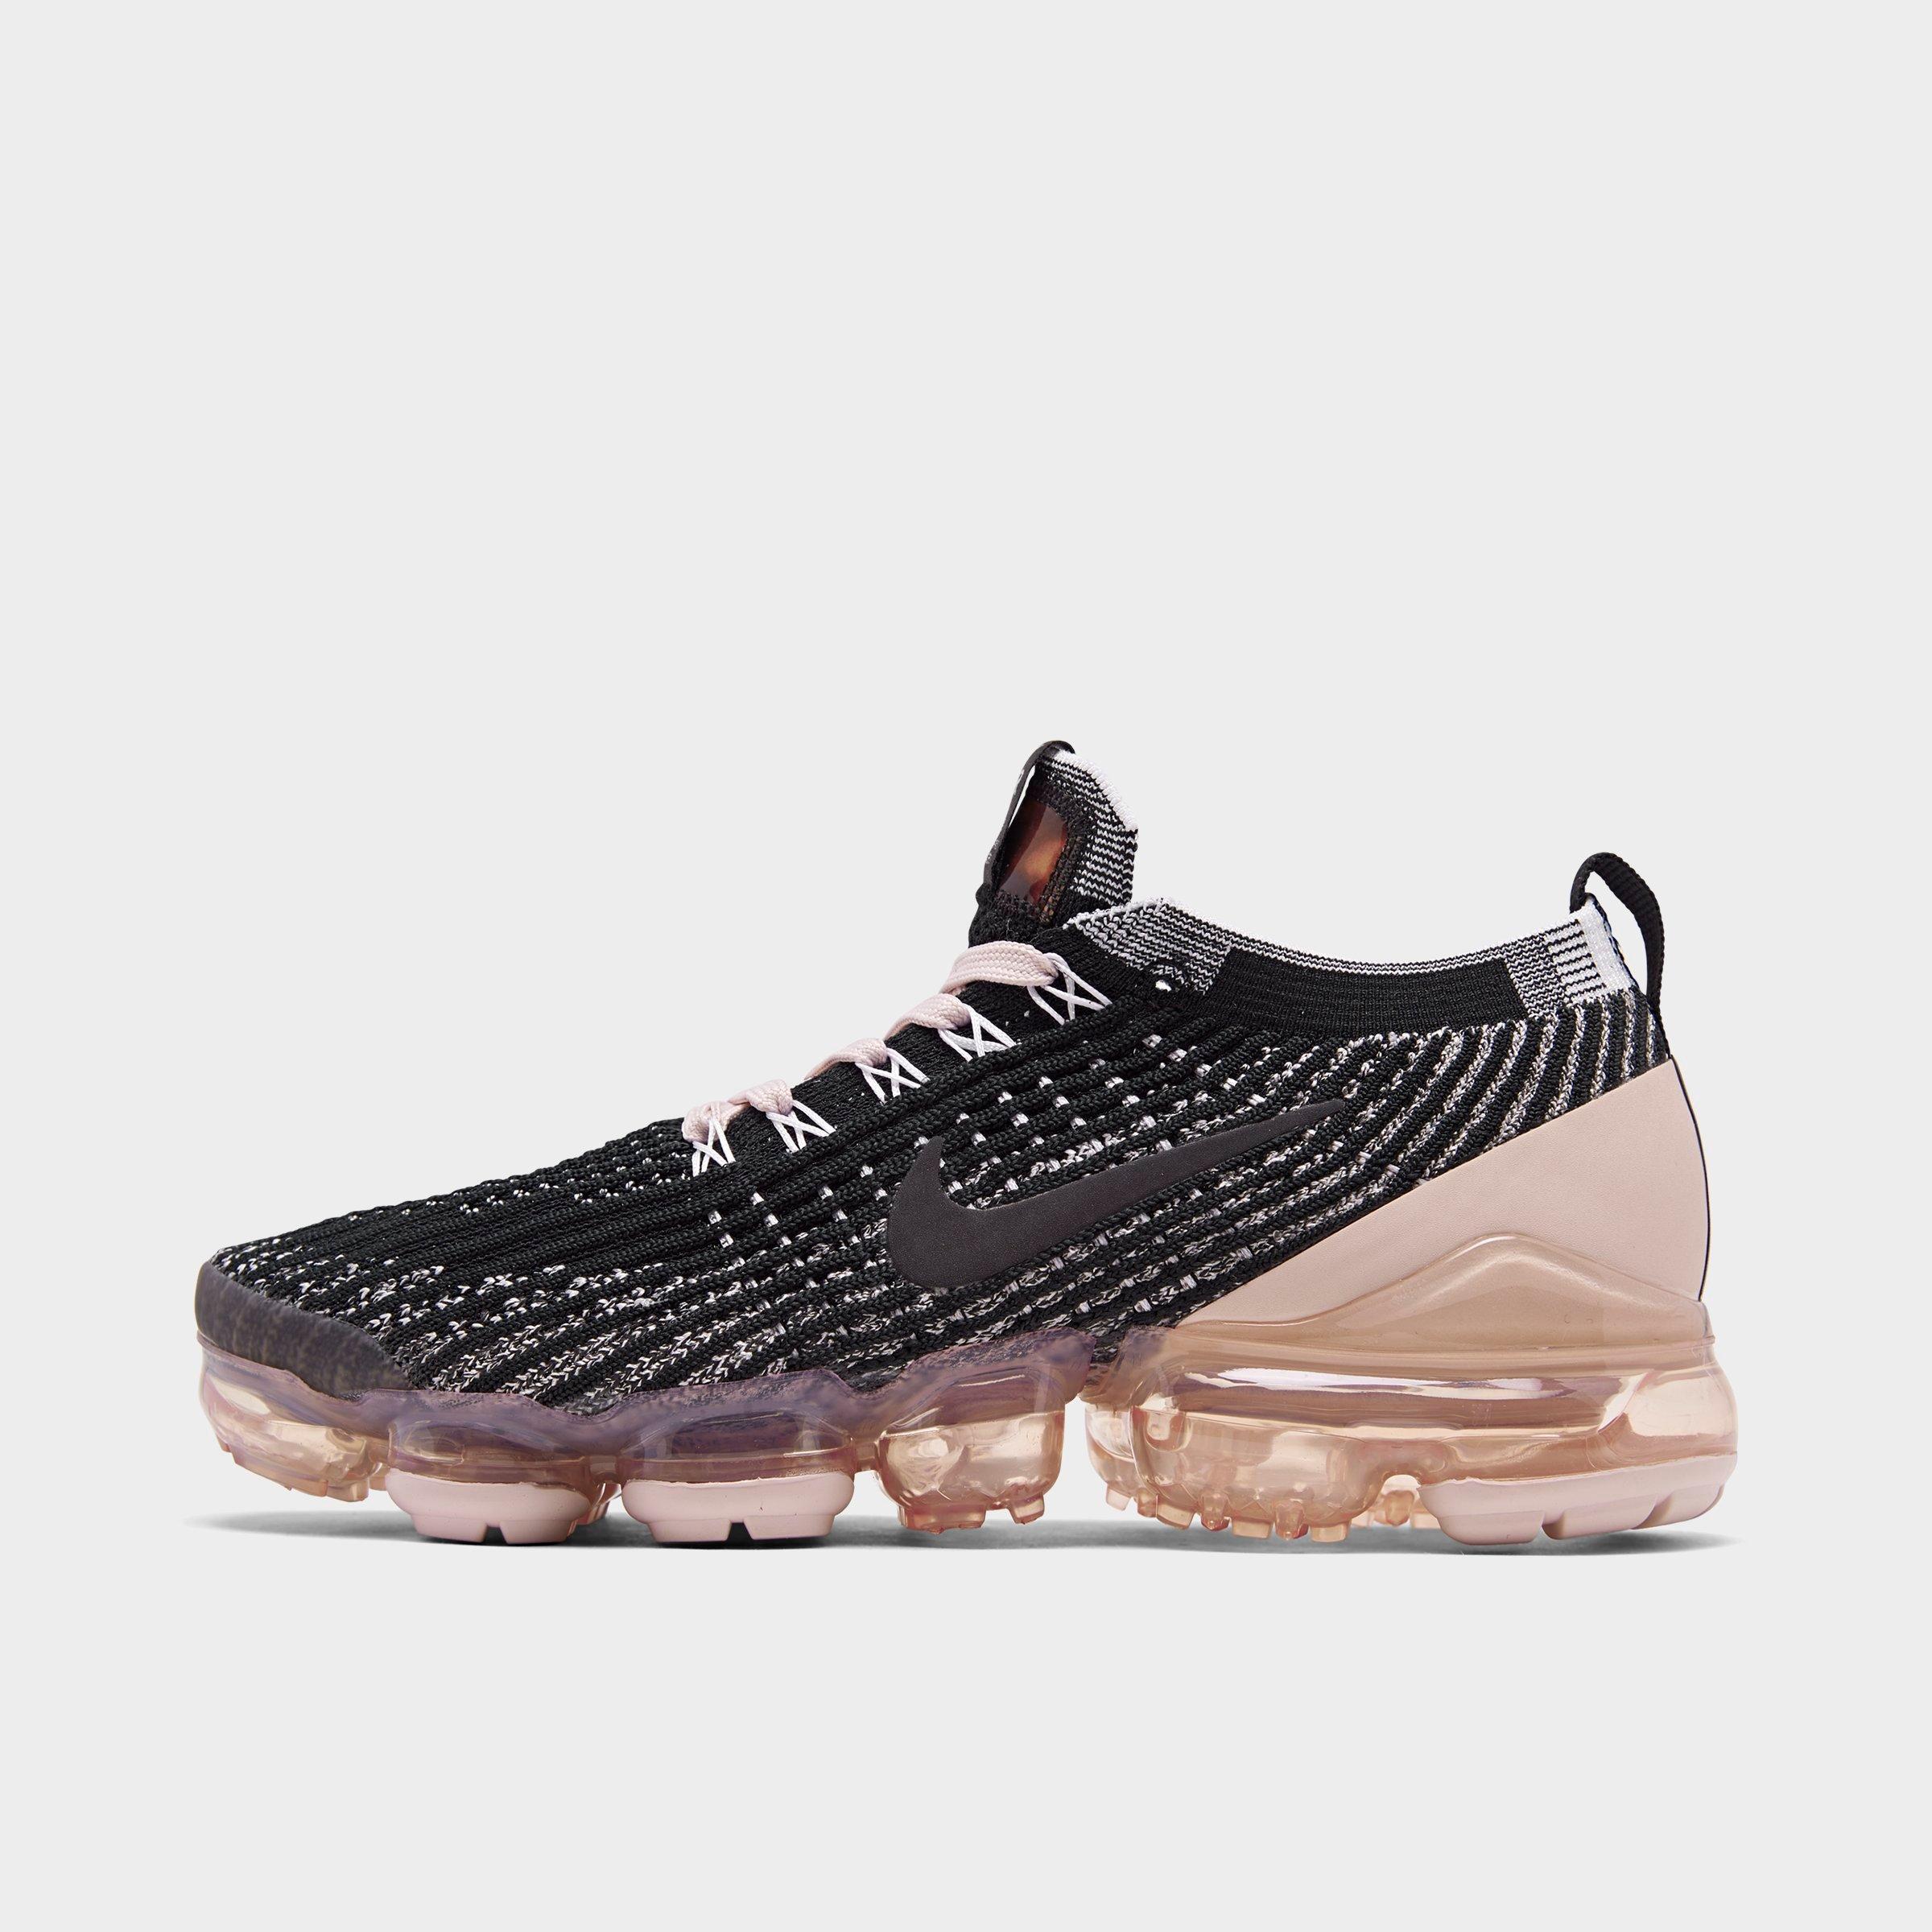 Nike Air VaporMax Flyknit 2 Chinese New Year 2019 in